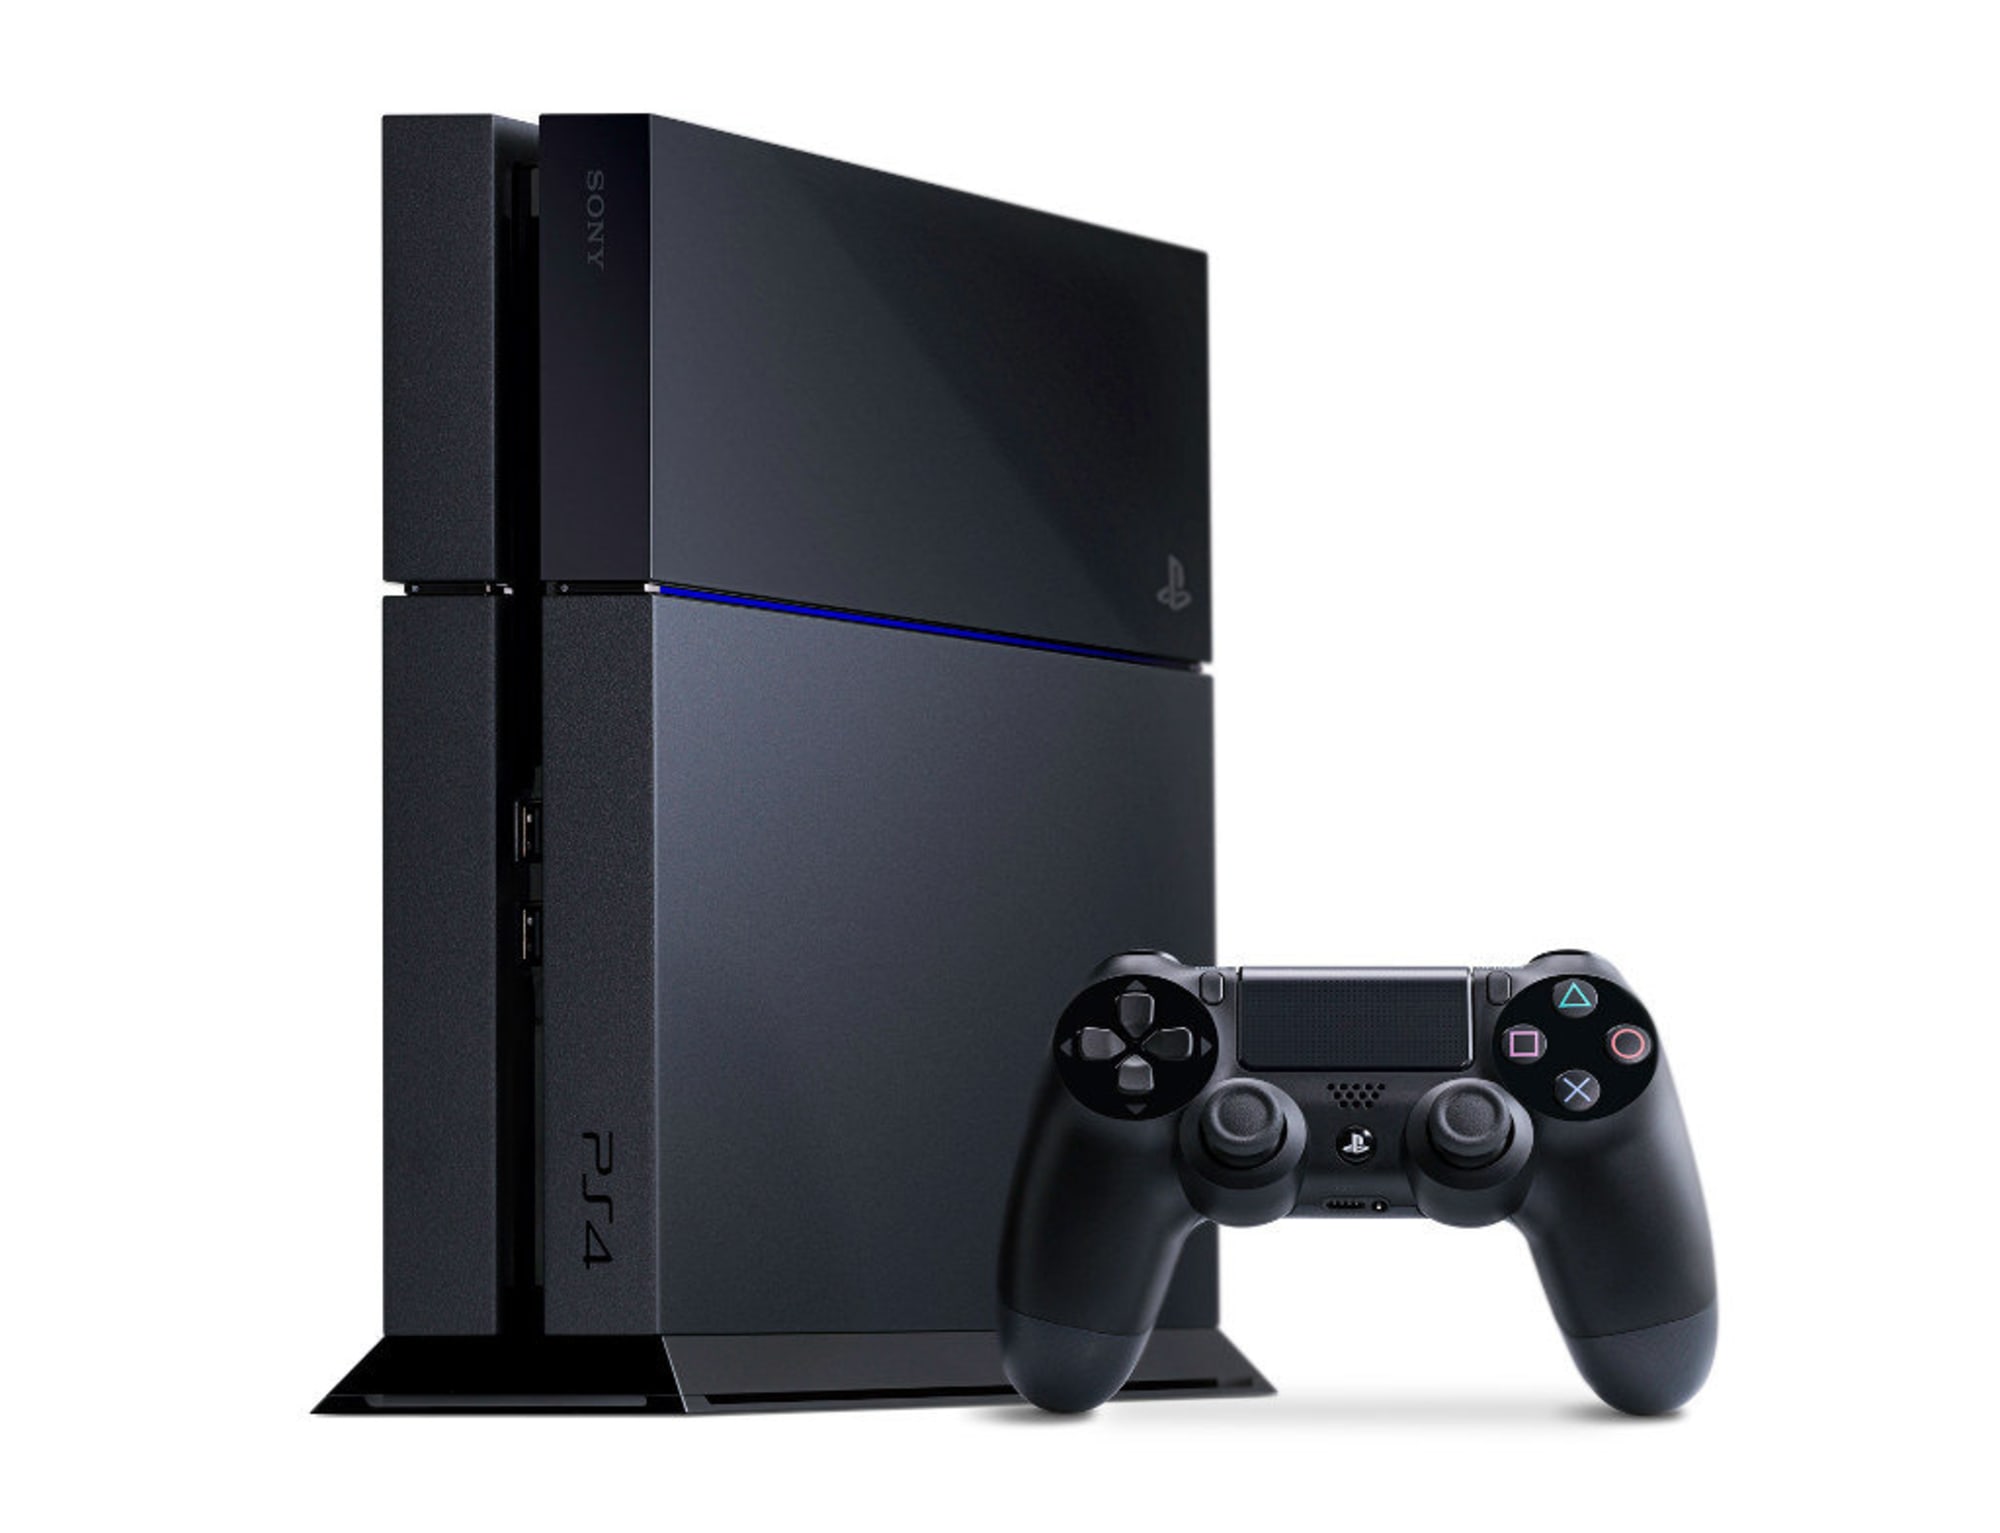 PS4 Surpass 40 Million, Forecasted Expectations